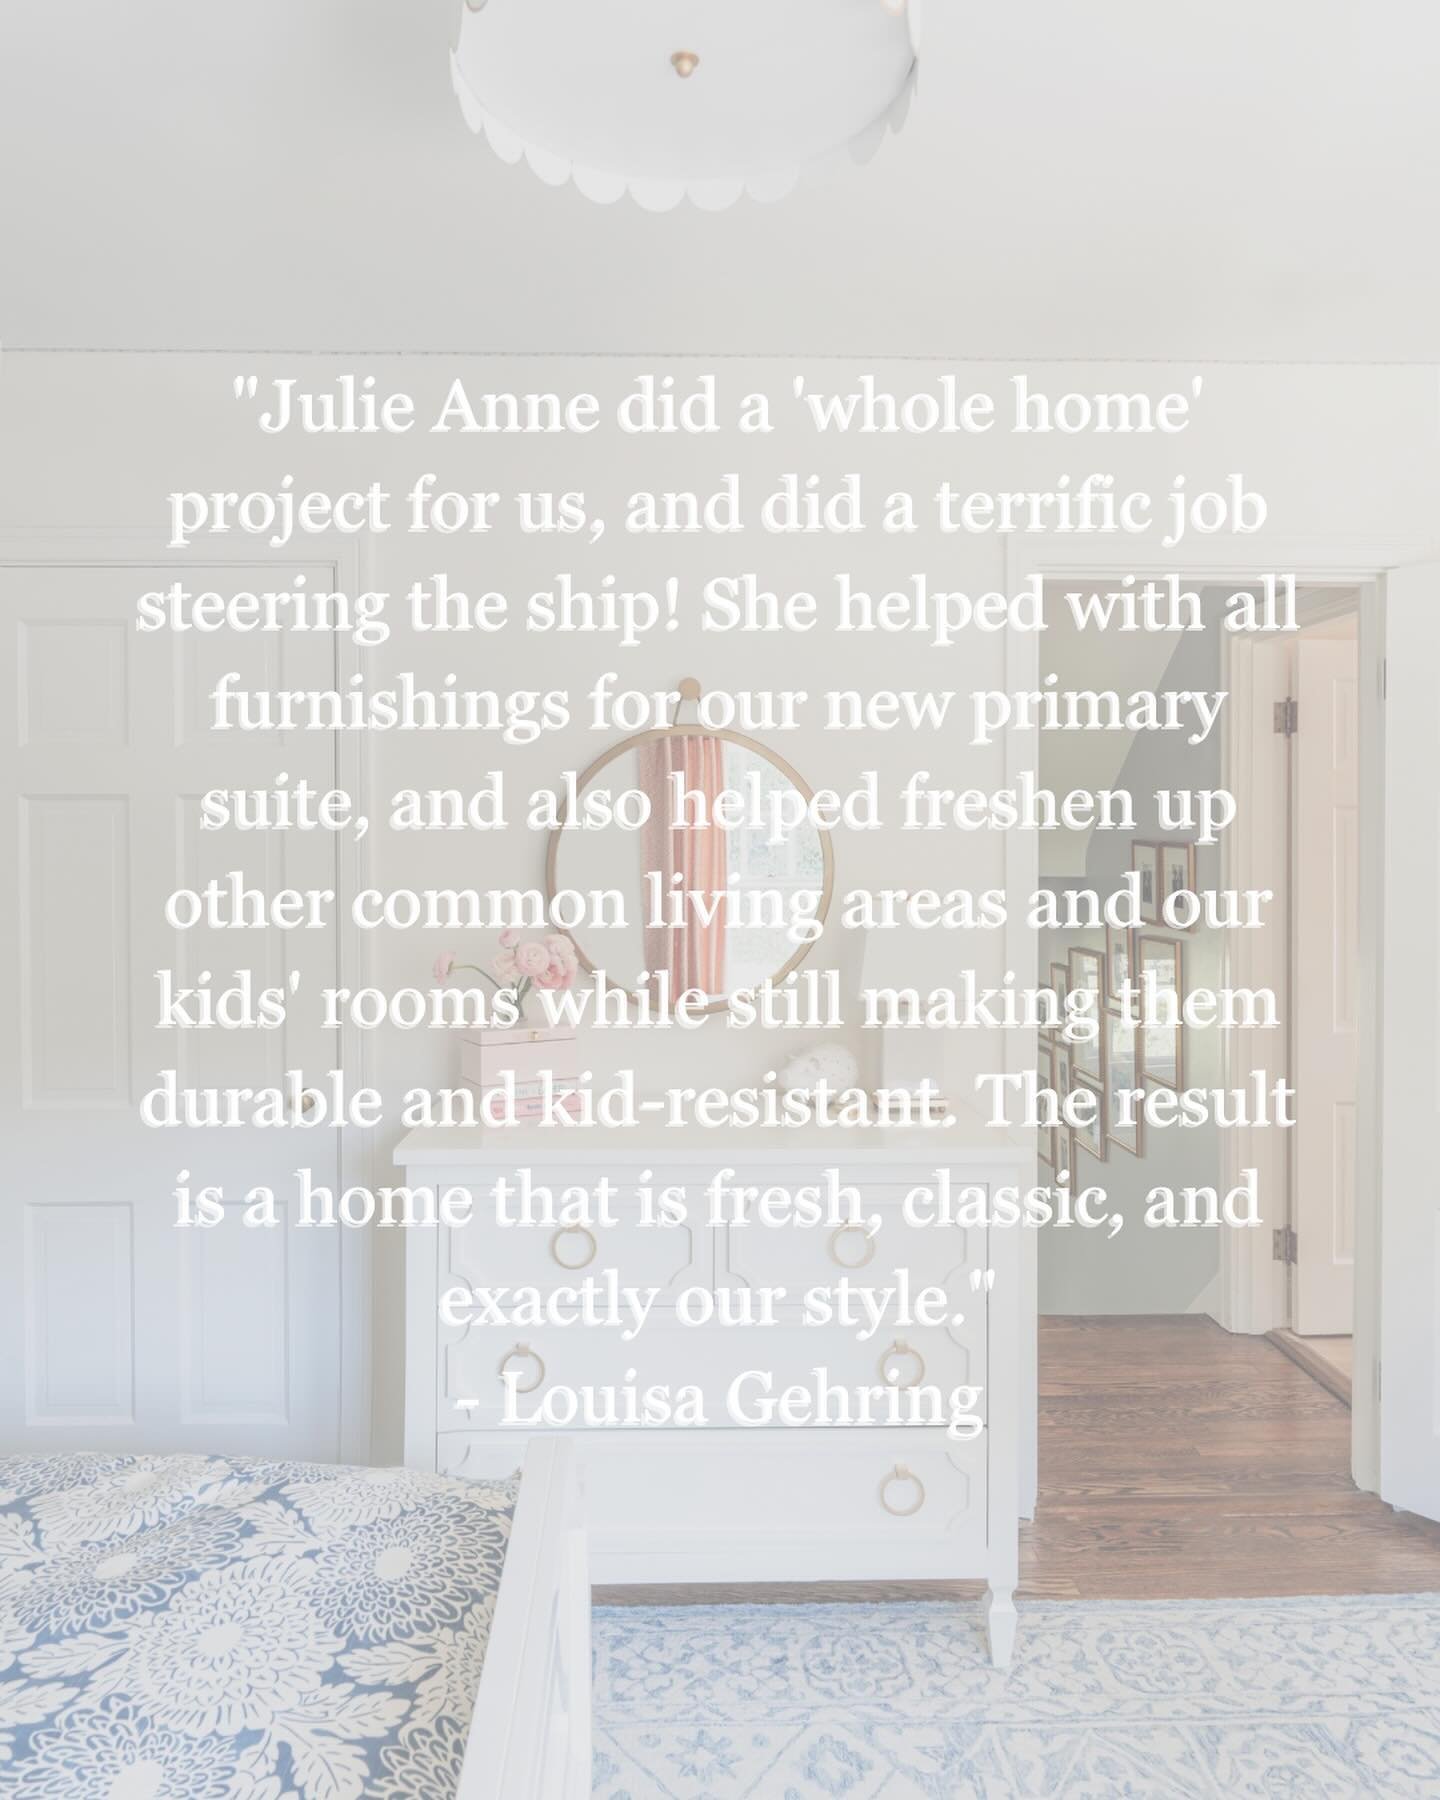 We love hearing from our clients! 💗✨

&ldquo;Julie Anne did a &lsquo;whole home&rsquo; project for us, and did a terrific job steering the ship! She helped with all furnishings for our new primary suite, and also helped freshen up other common livin